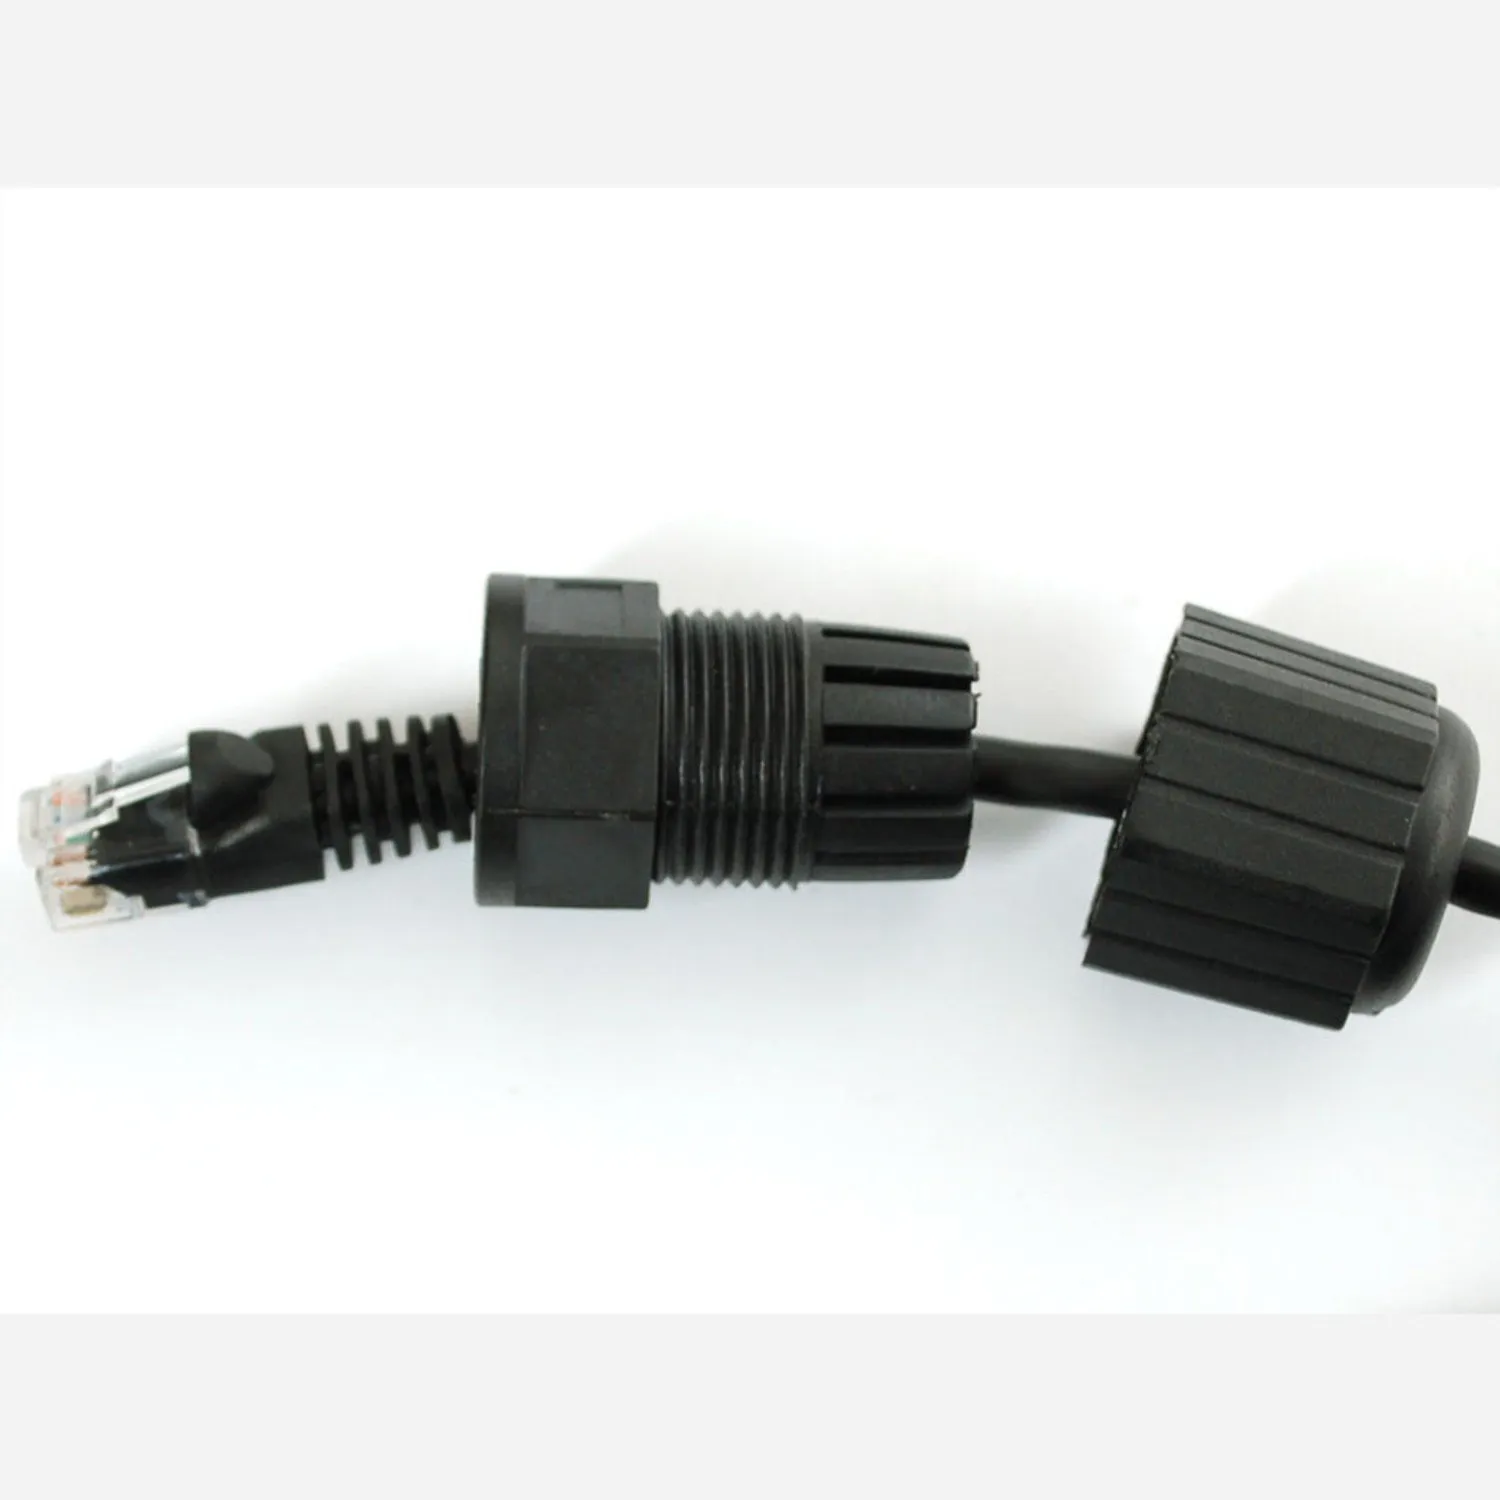 Photo of Cable Gland - Waterproof RJ-45 / Ethernet connector [RJ-45]